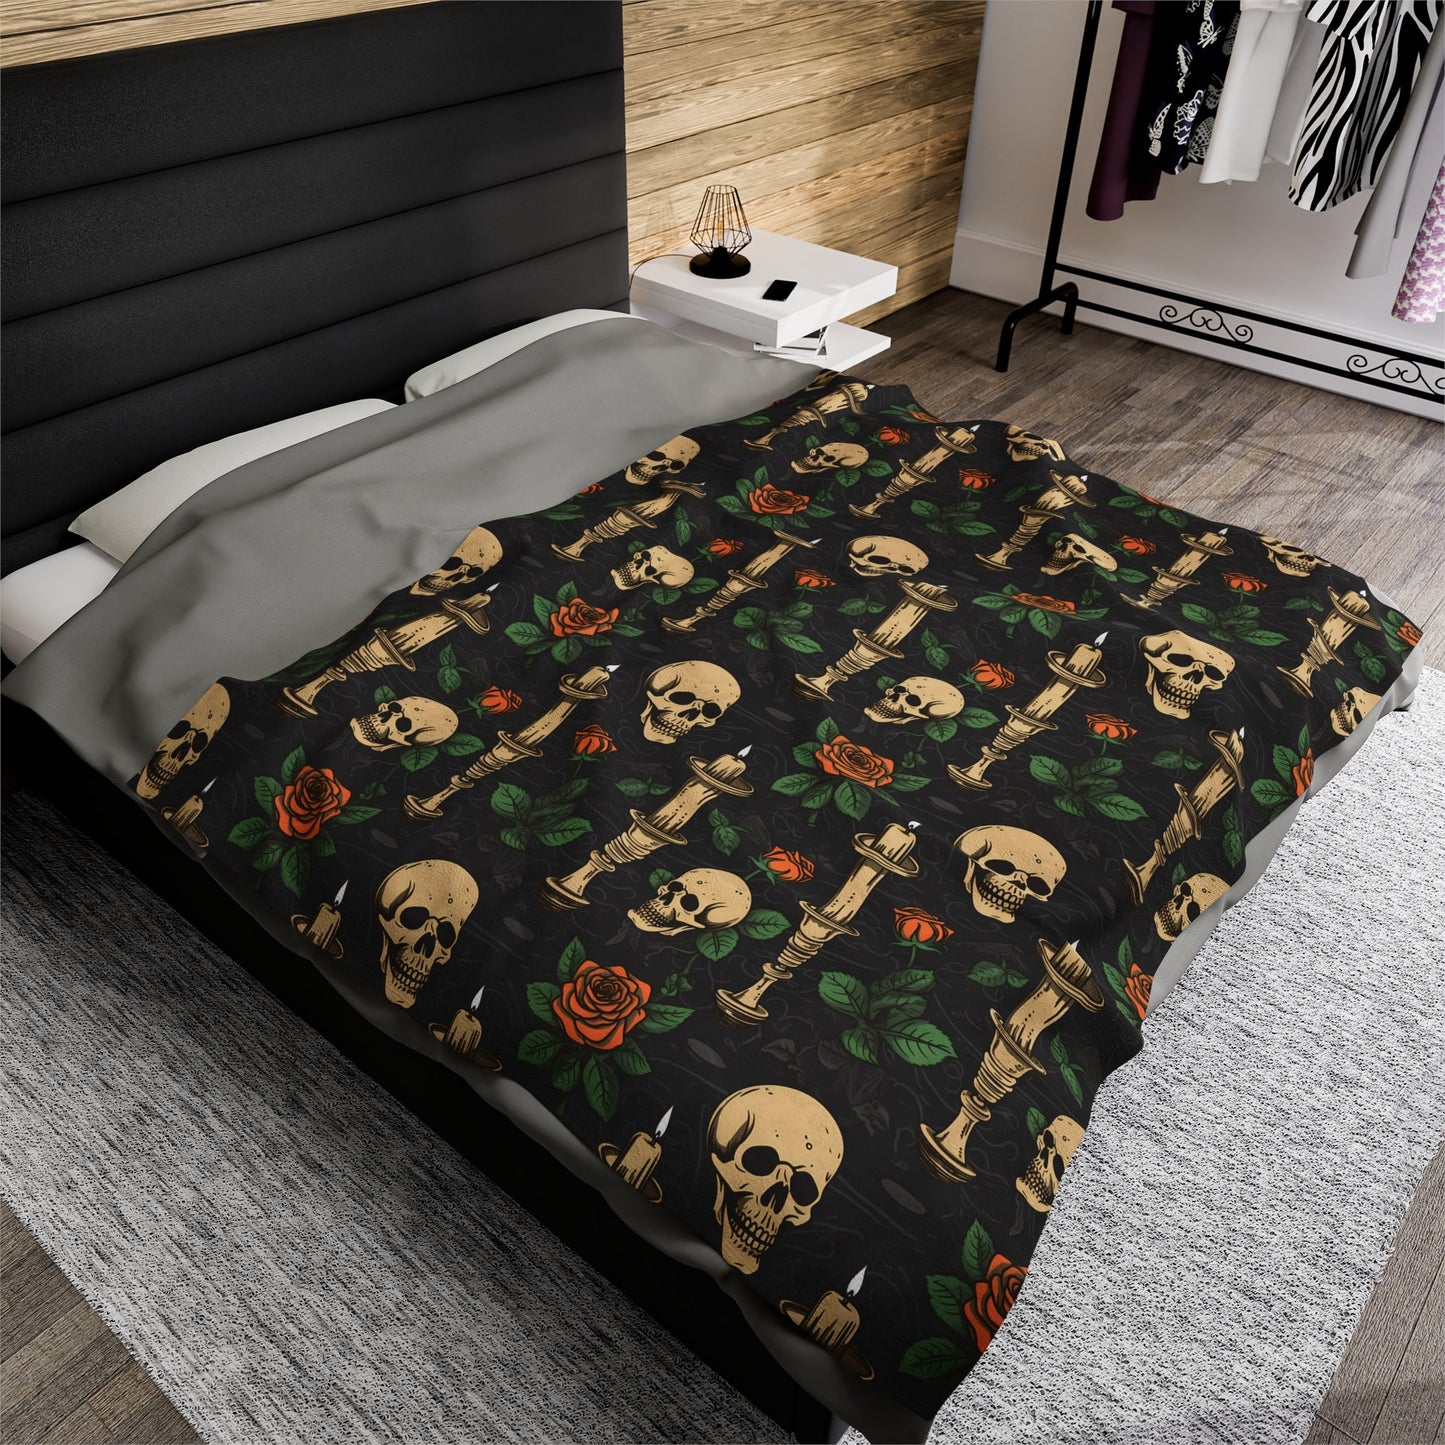 Skulls Roses and Candles Print Throw BlanketAll Over PrintsVTZdesigns60" × 80"All Over PrintAOPBed